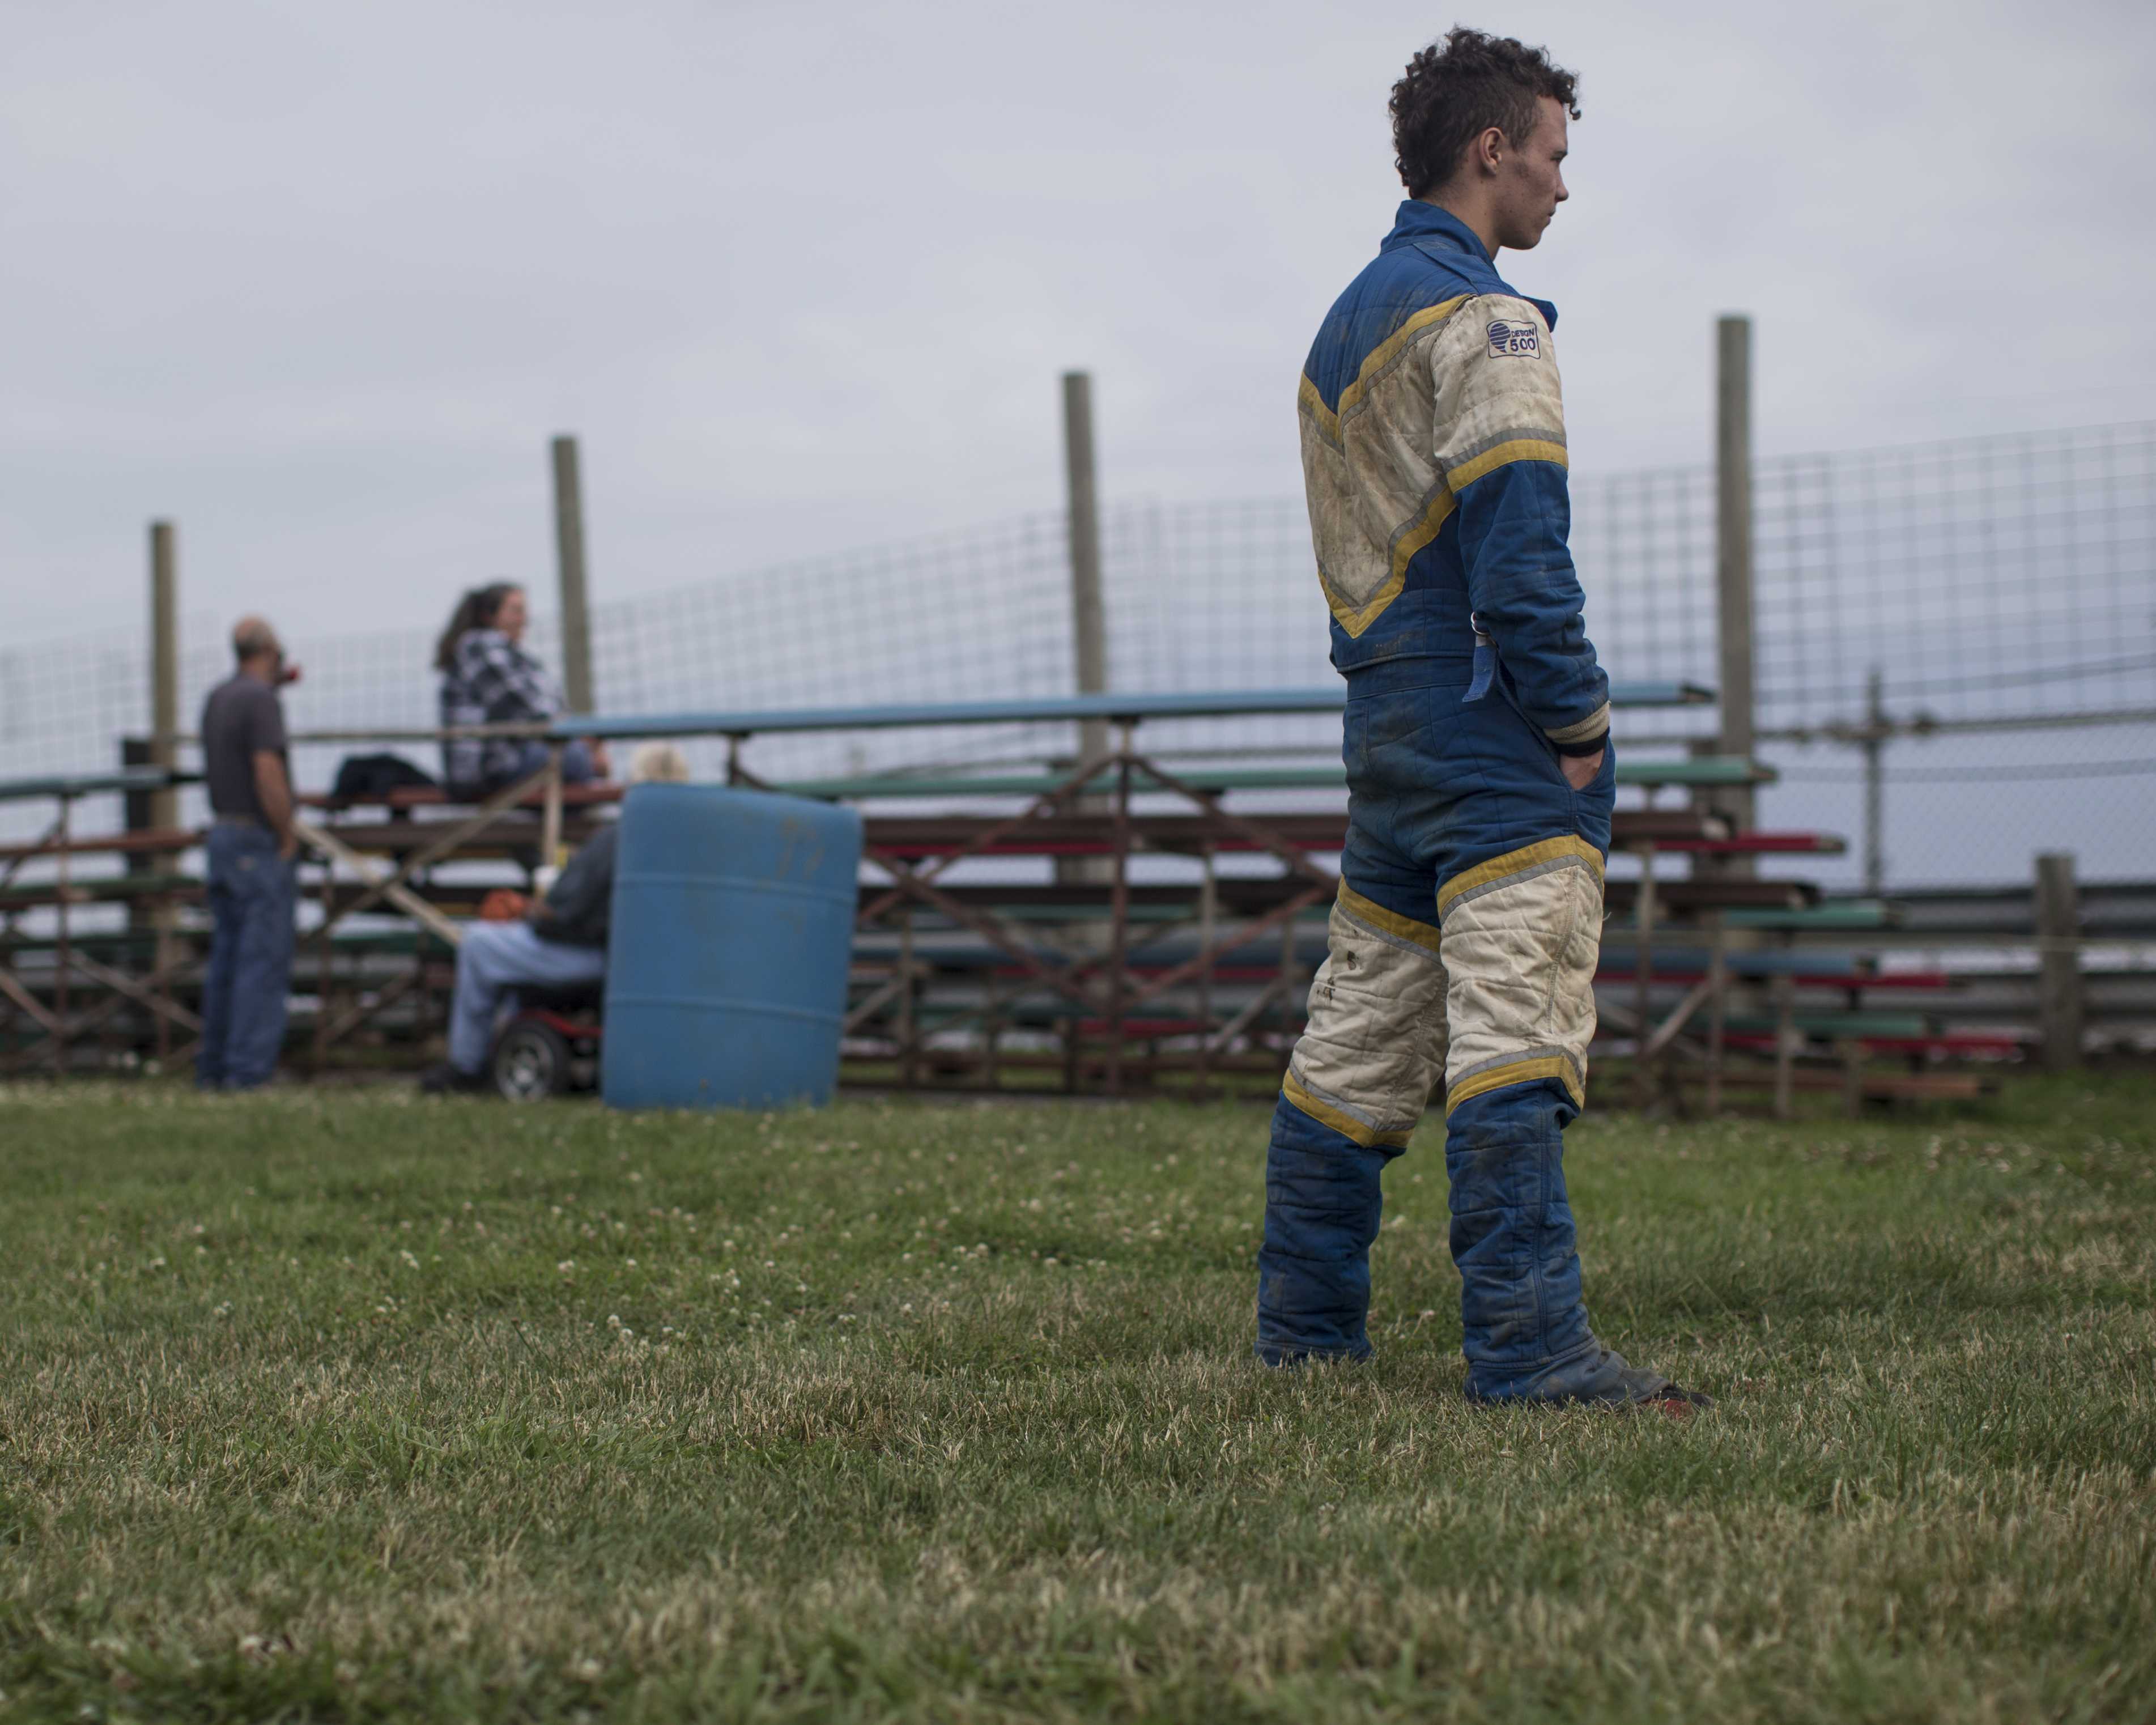 A driver watches the track during a race at the Brooklyn Raceway in Brooklyn, Iowa on Sunday, July 3, 2016. During the summer months, dirt track racing remains a popular sport across the state. (The Daily Iowan/Brooklynn Kascel)